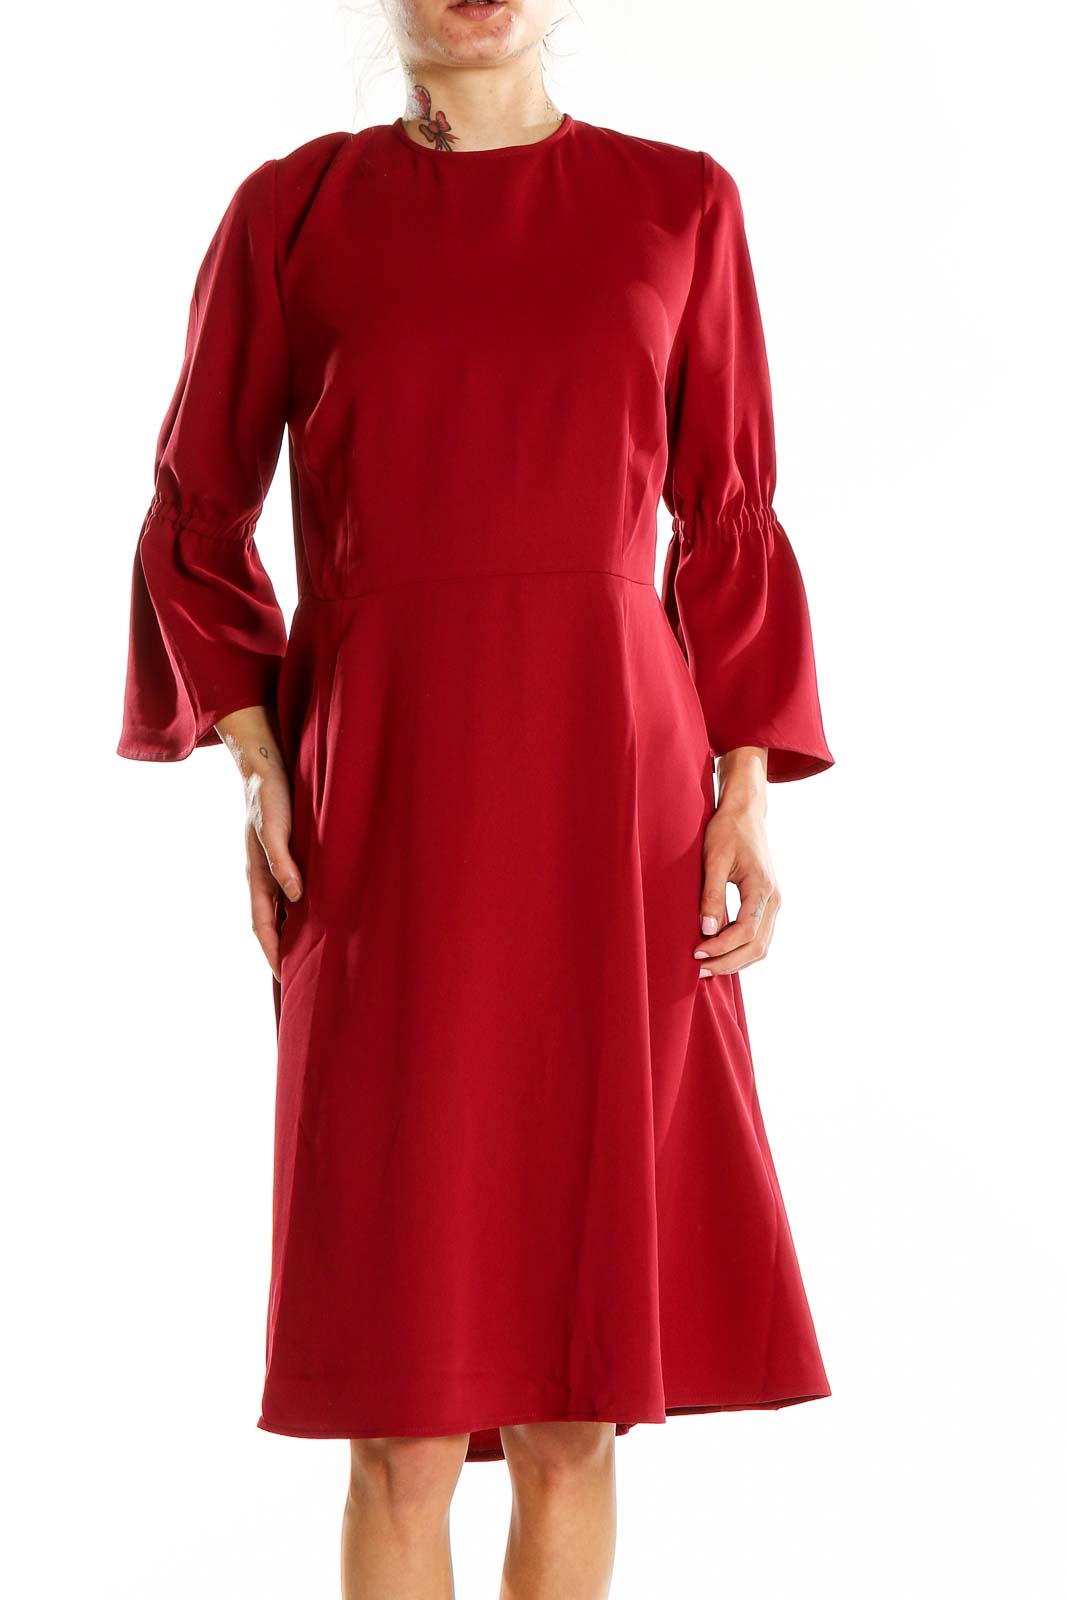 Red Bell Sleeve Flare Dress Front